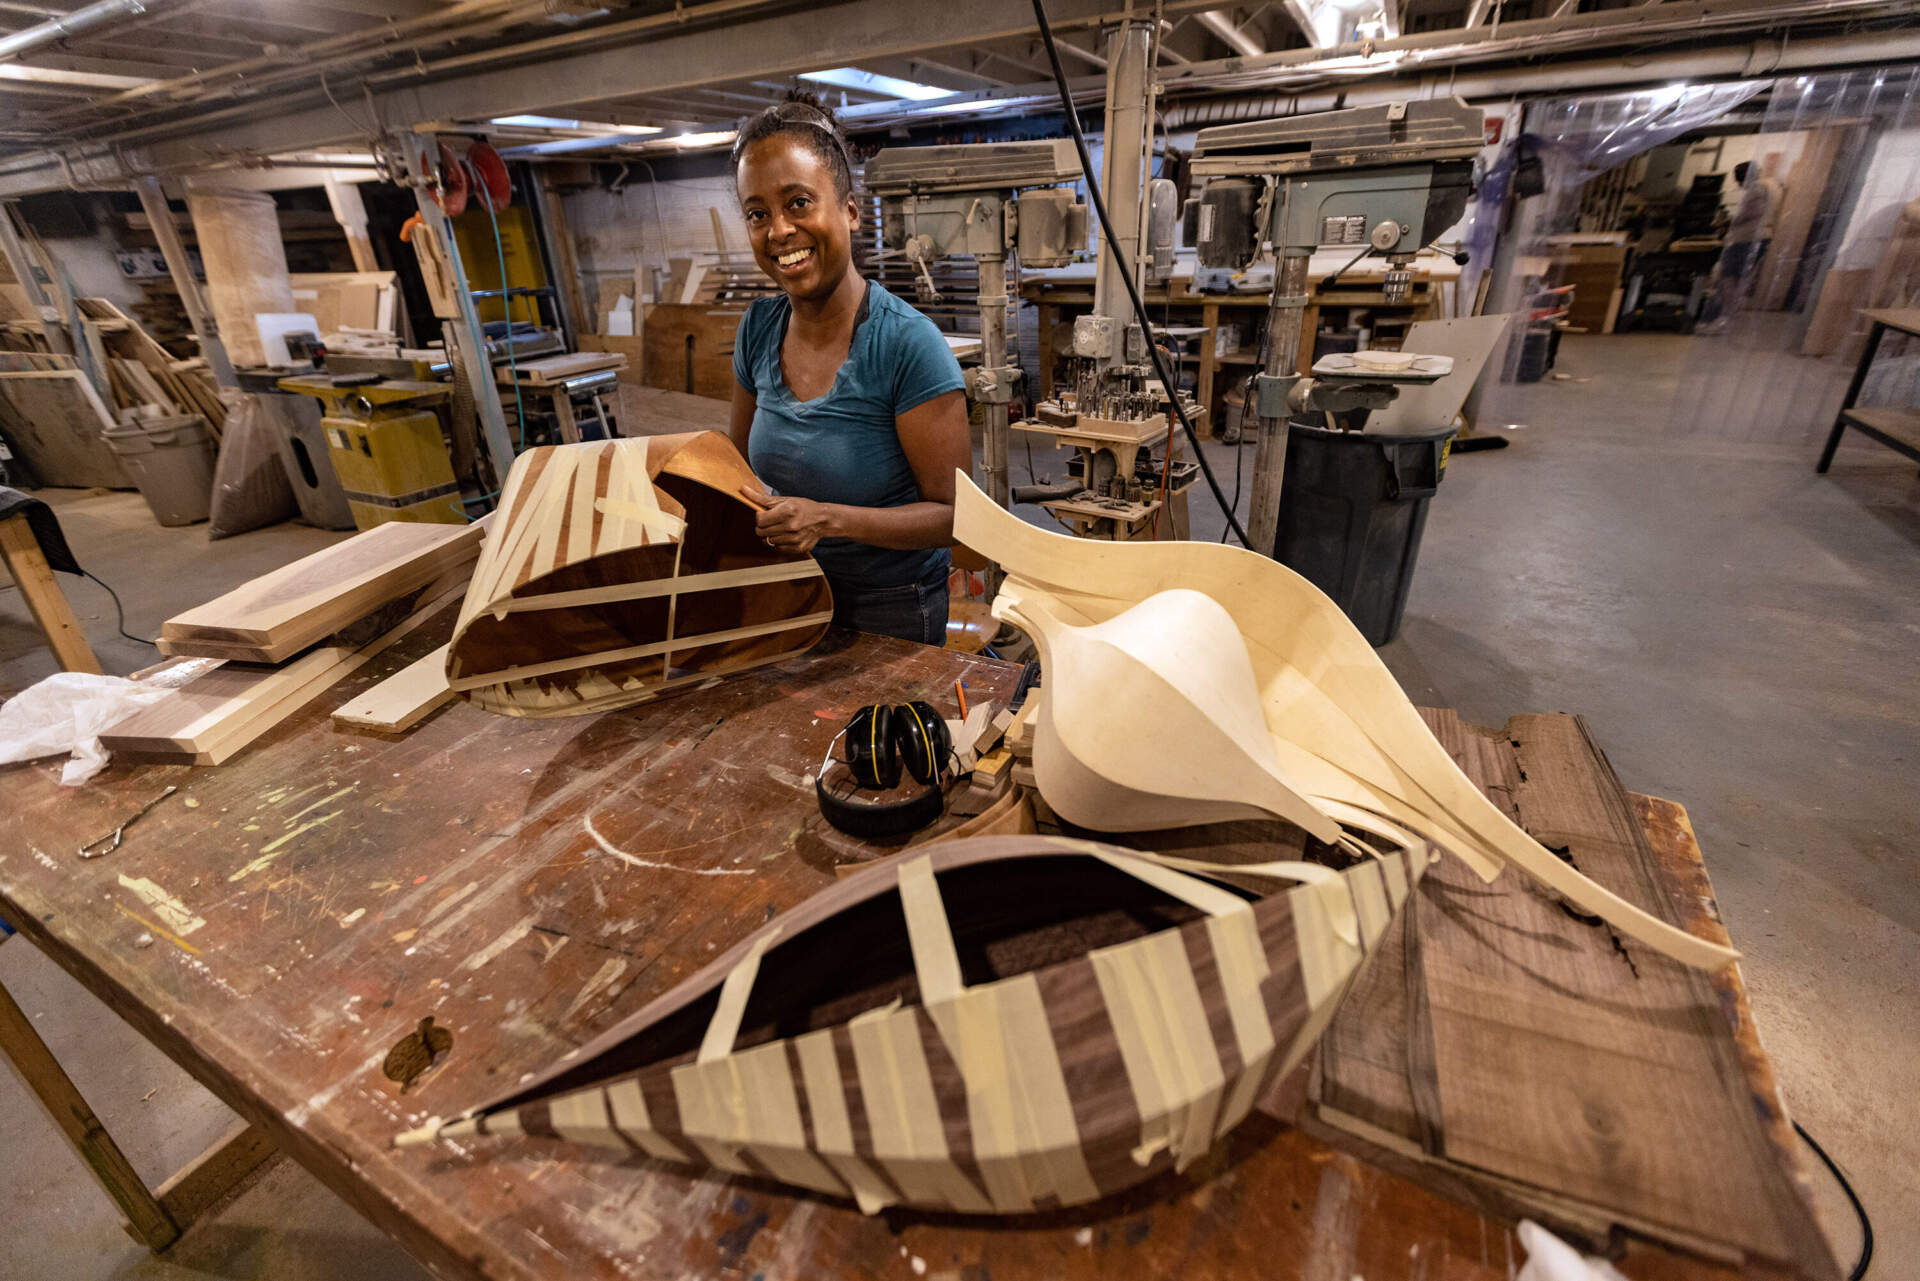 Artist and woodworker Alison Croney Moses in her woodshop. (Jesse Costa/WBUR)